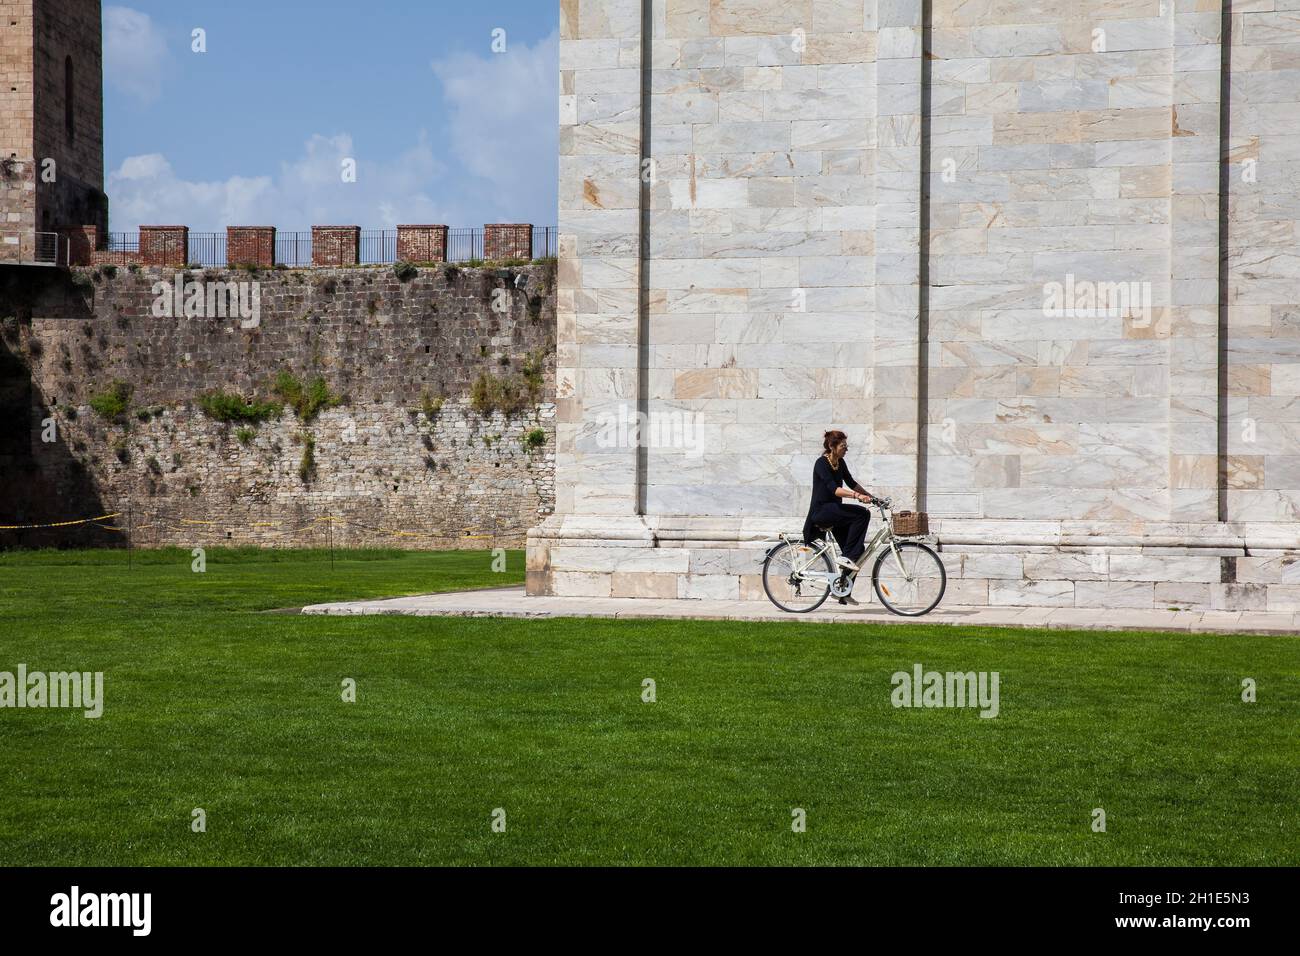 PISA, ITALY - APRIL, 2018: Woman biking next to the ancient walls of Pisa and Monumental Cemetery at the Square of Miracles in a beautiful early sprin Stock Photo